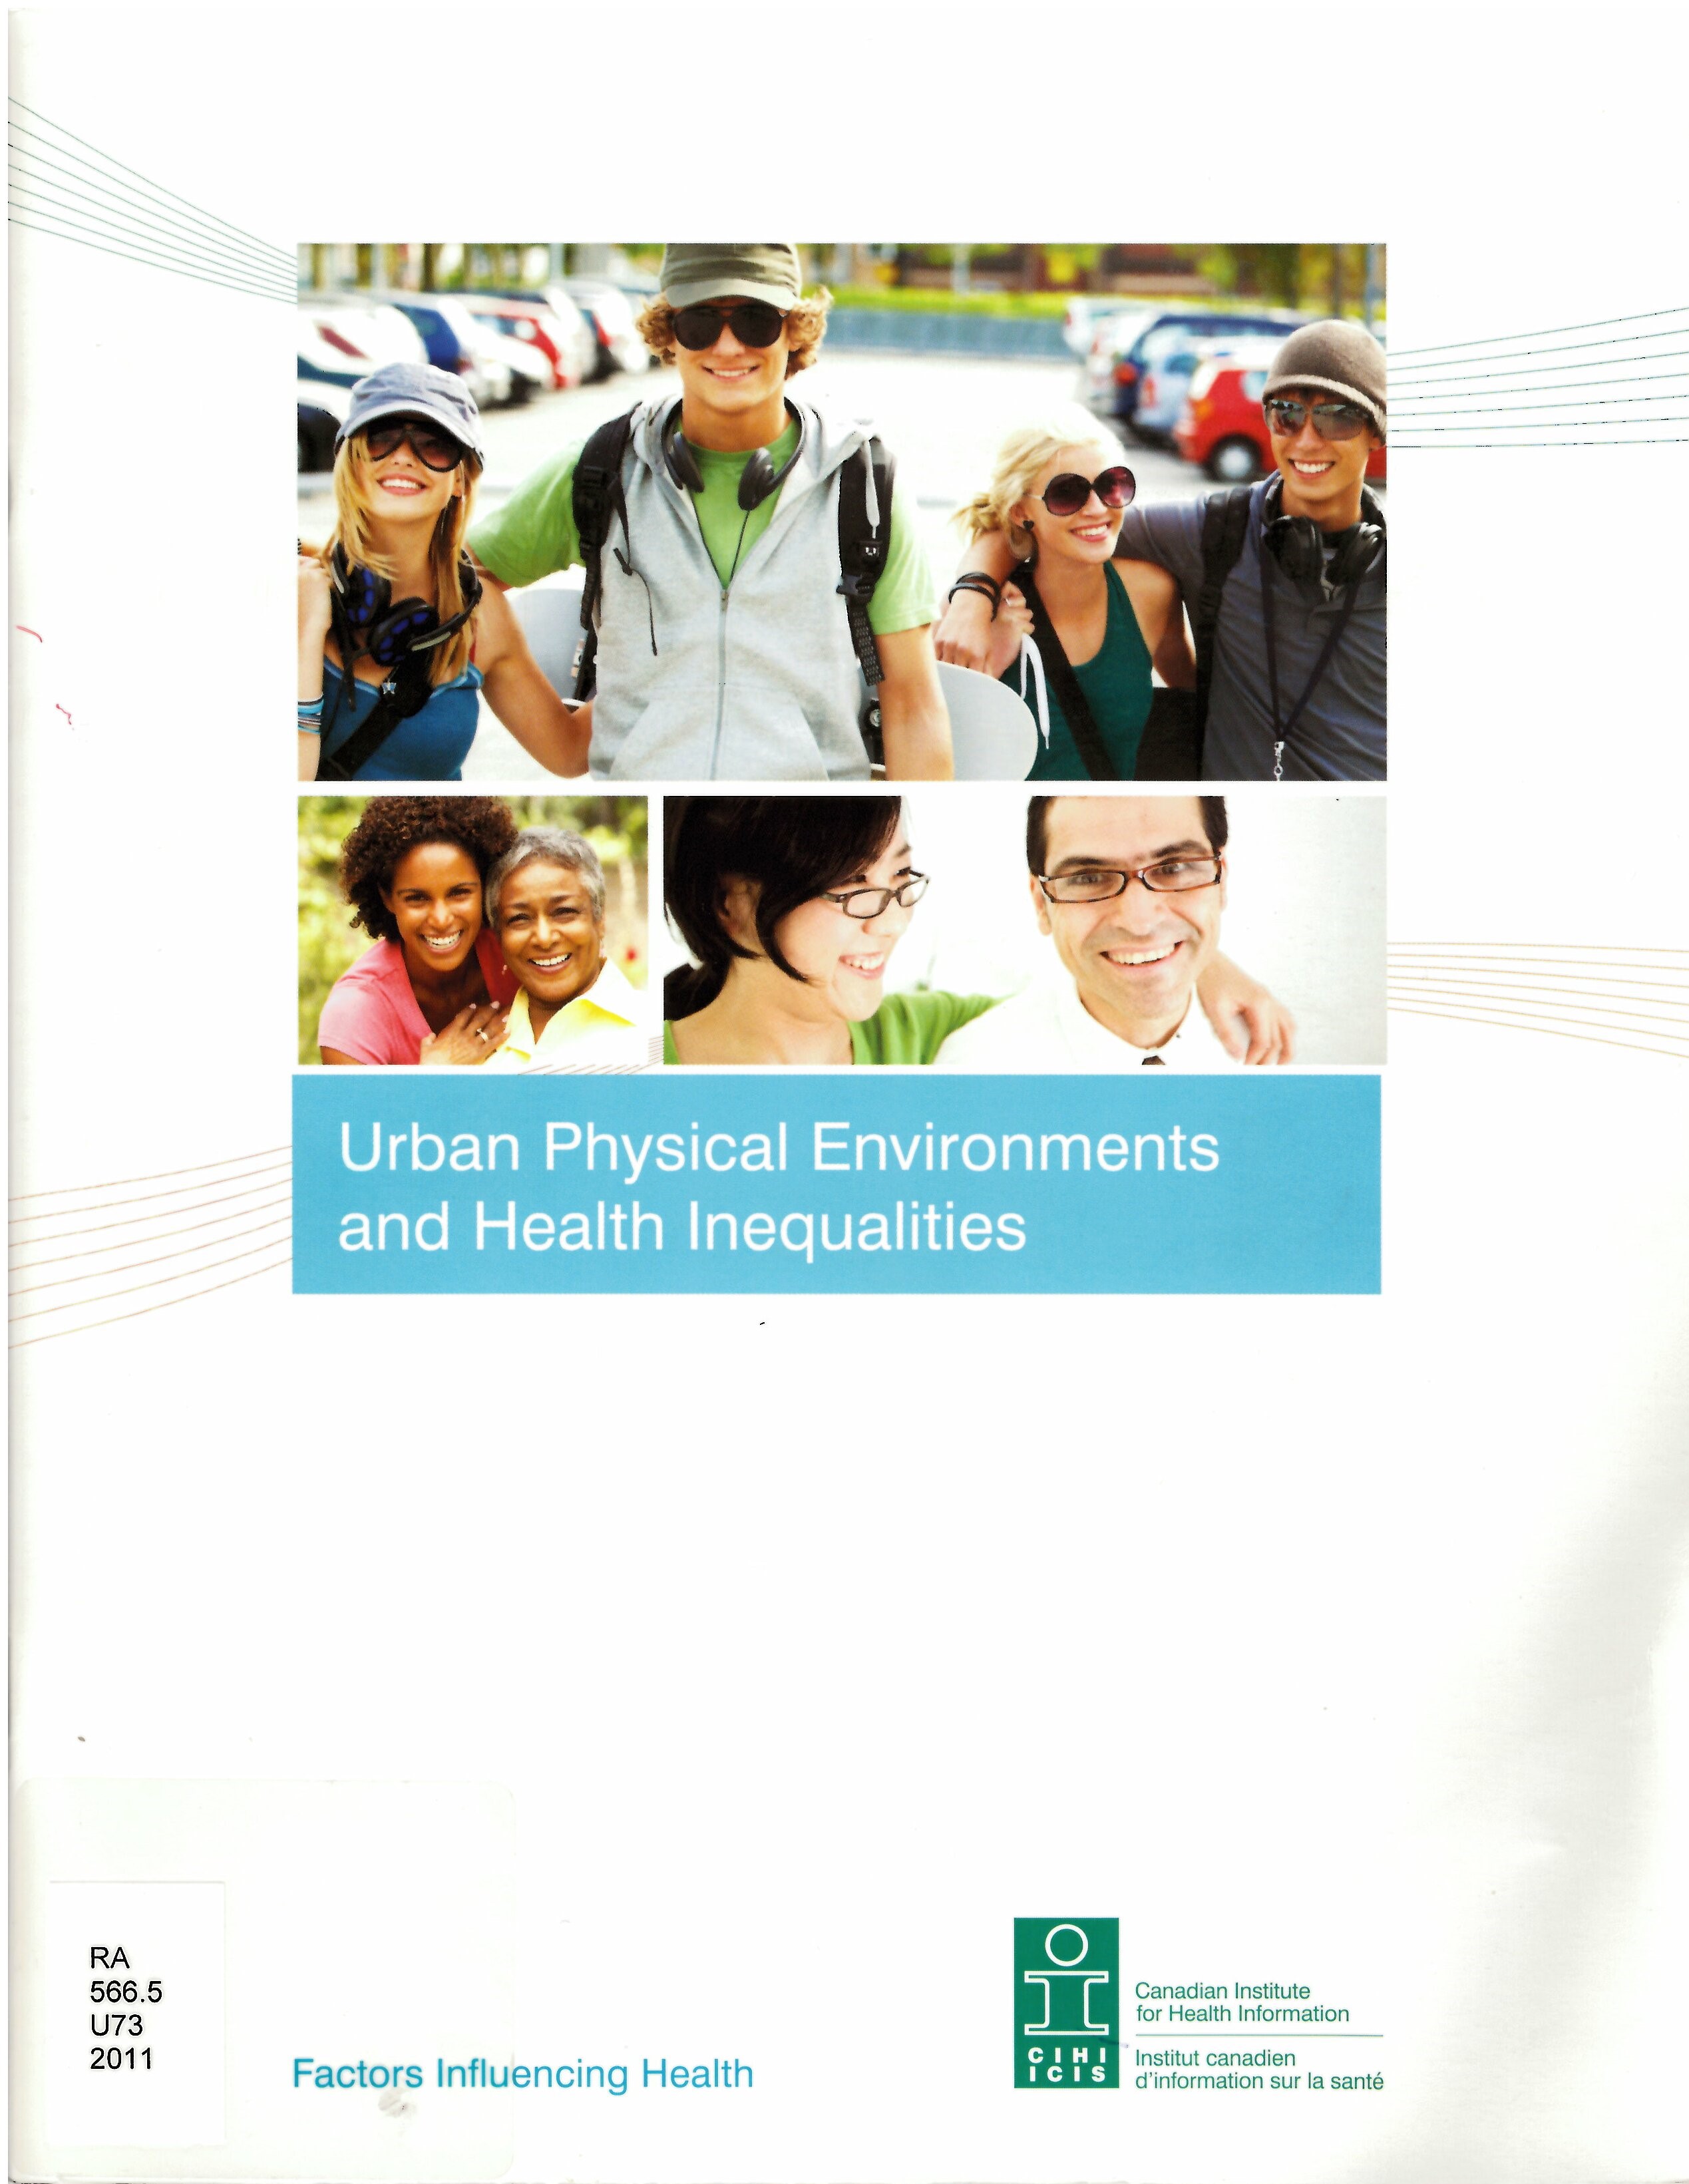 Urban physical environments and health inequalities